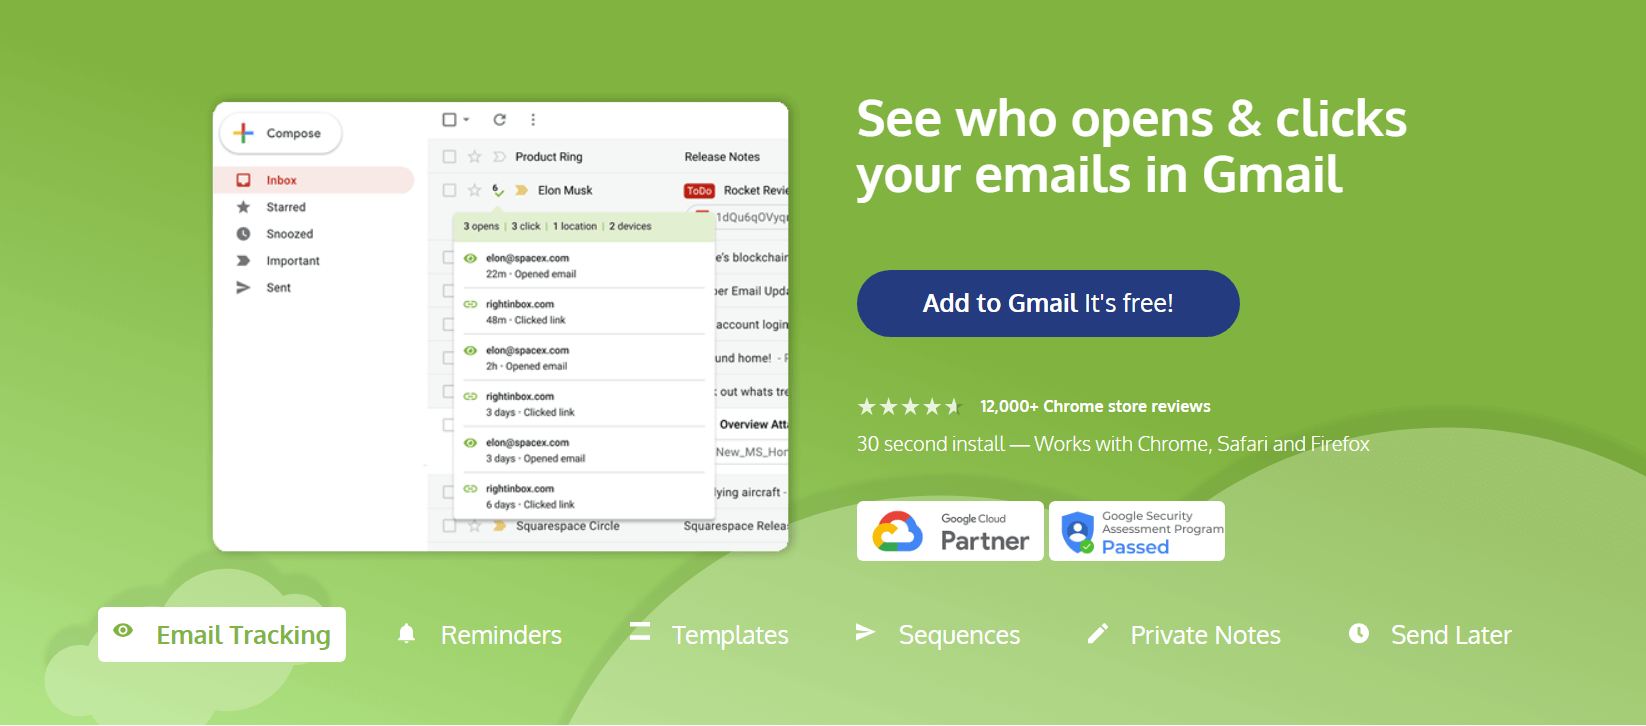 Right Inbox enhances Gmail for tracking and managing your emails